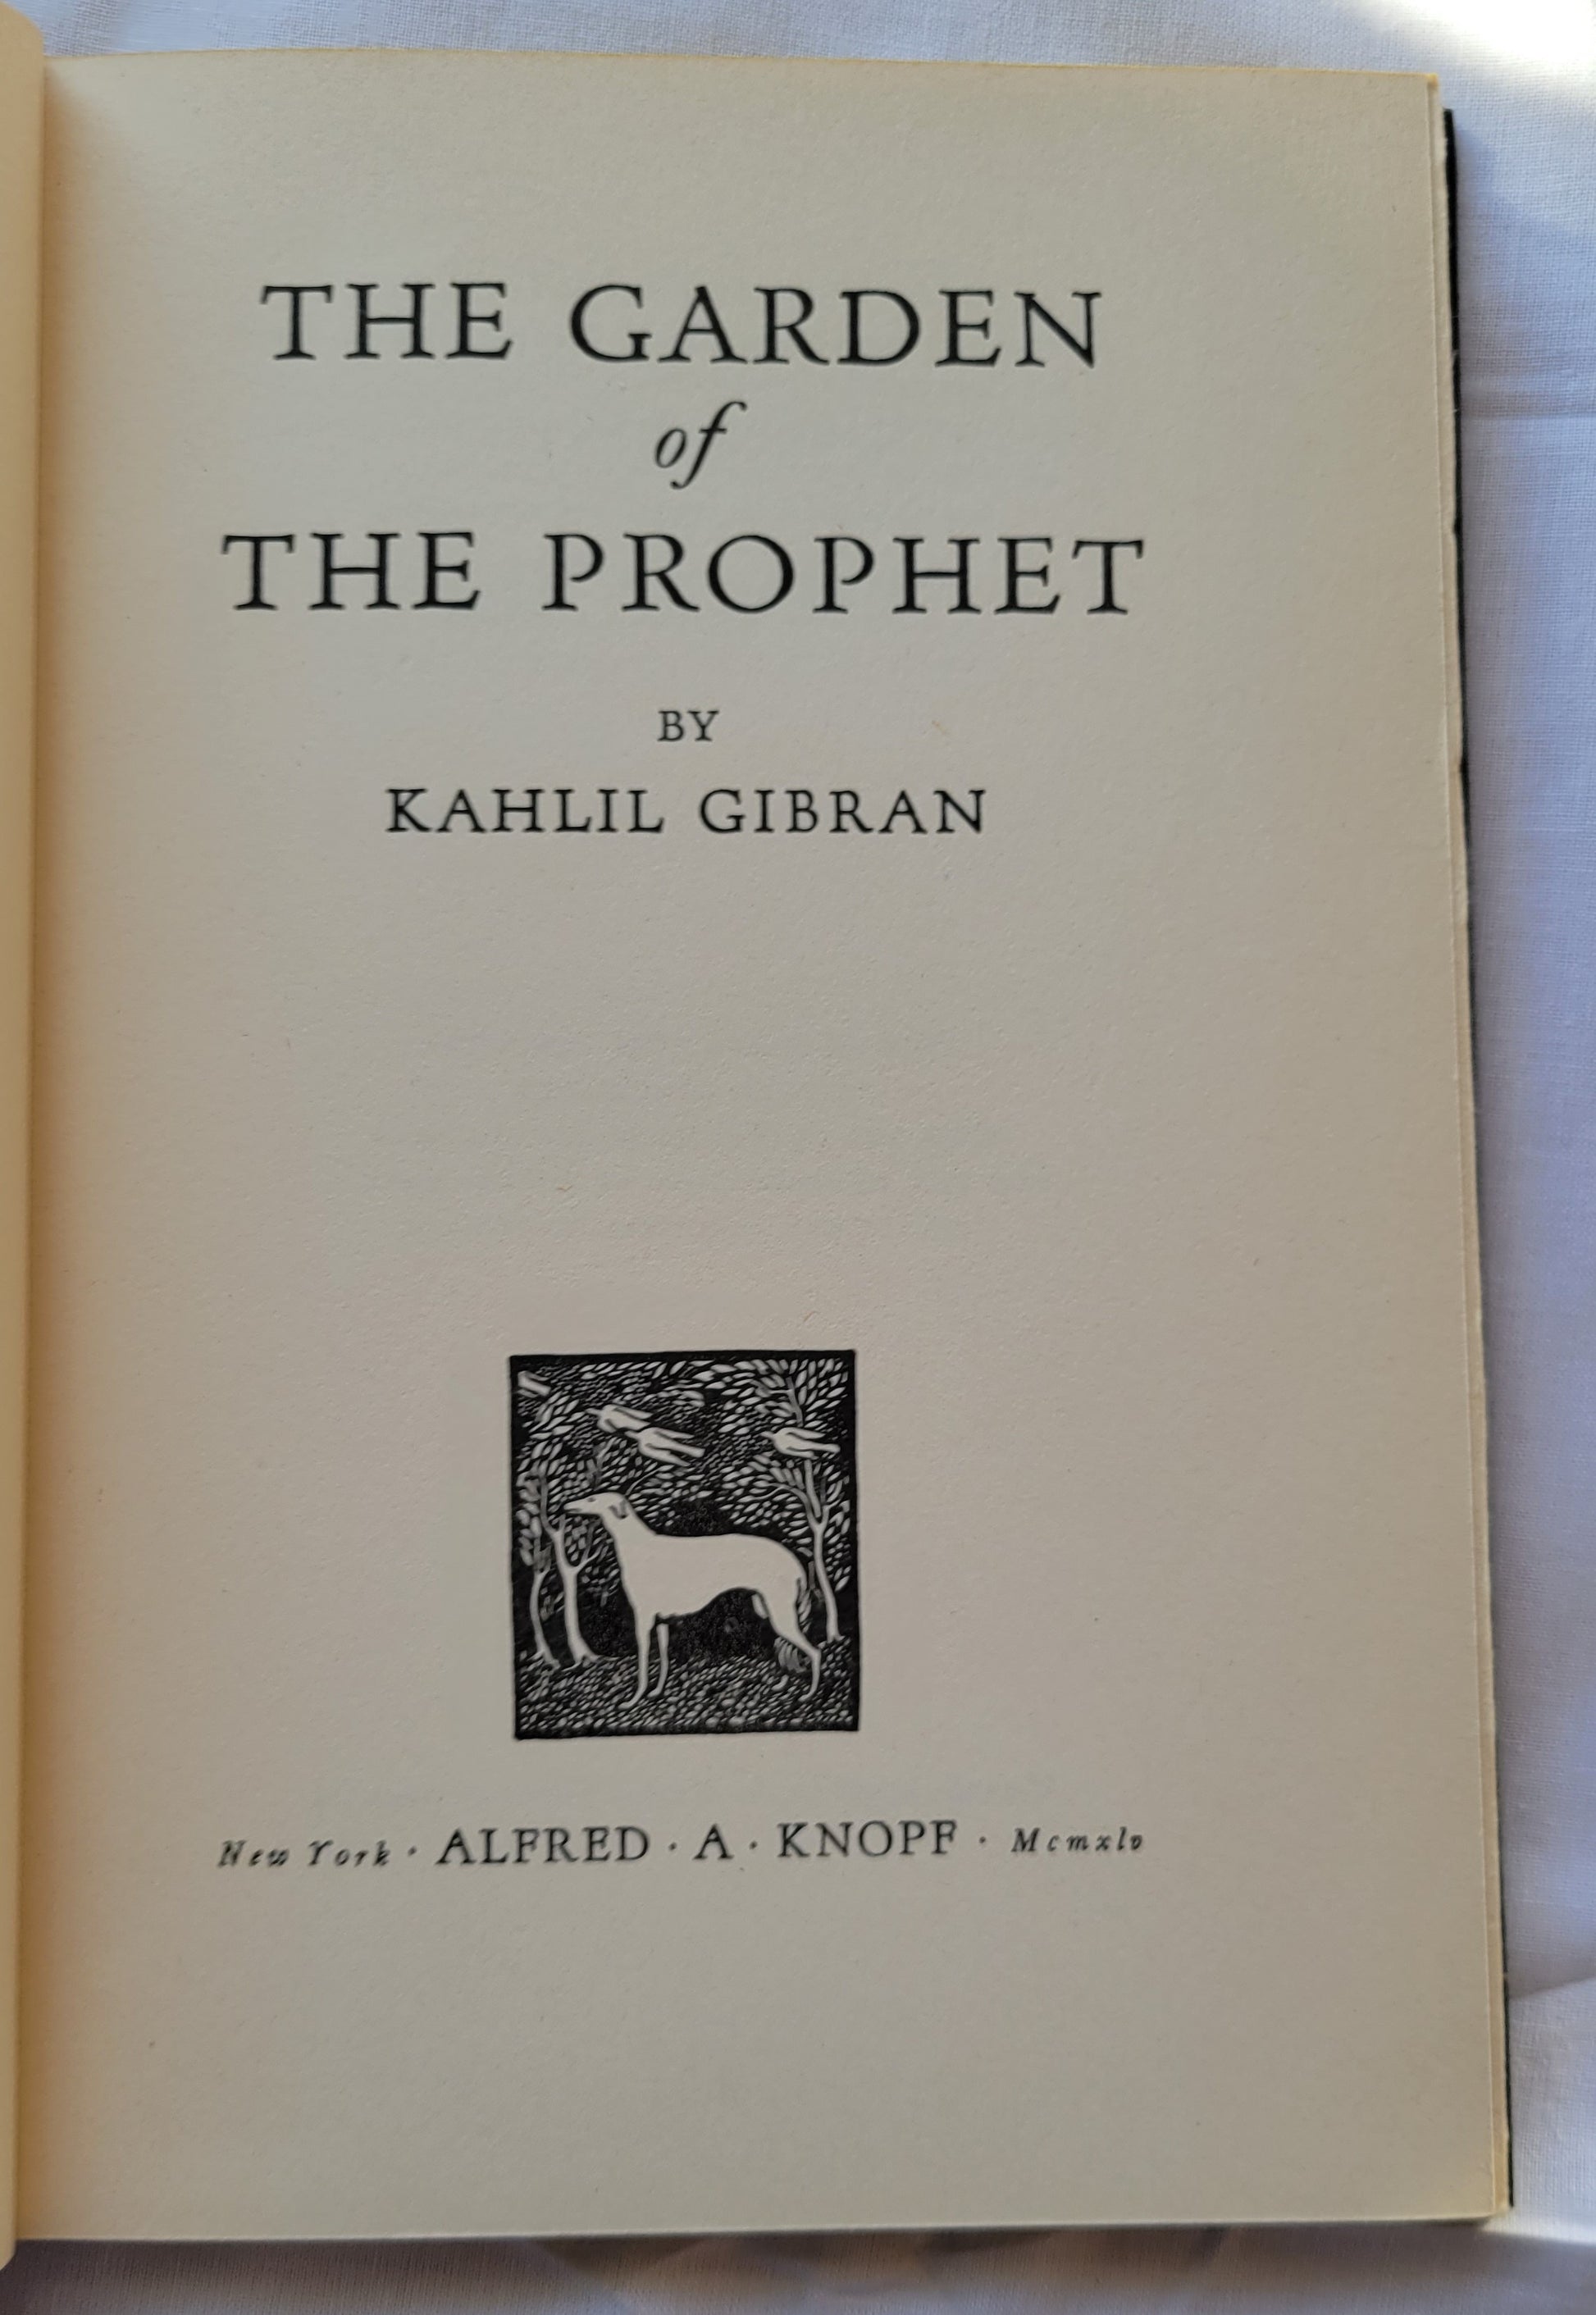 Vintage book for sale “The Garden of the Prophet” by Kahlil Gibran, published by Alfred A. Knoff. Title page.